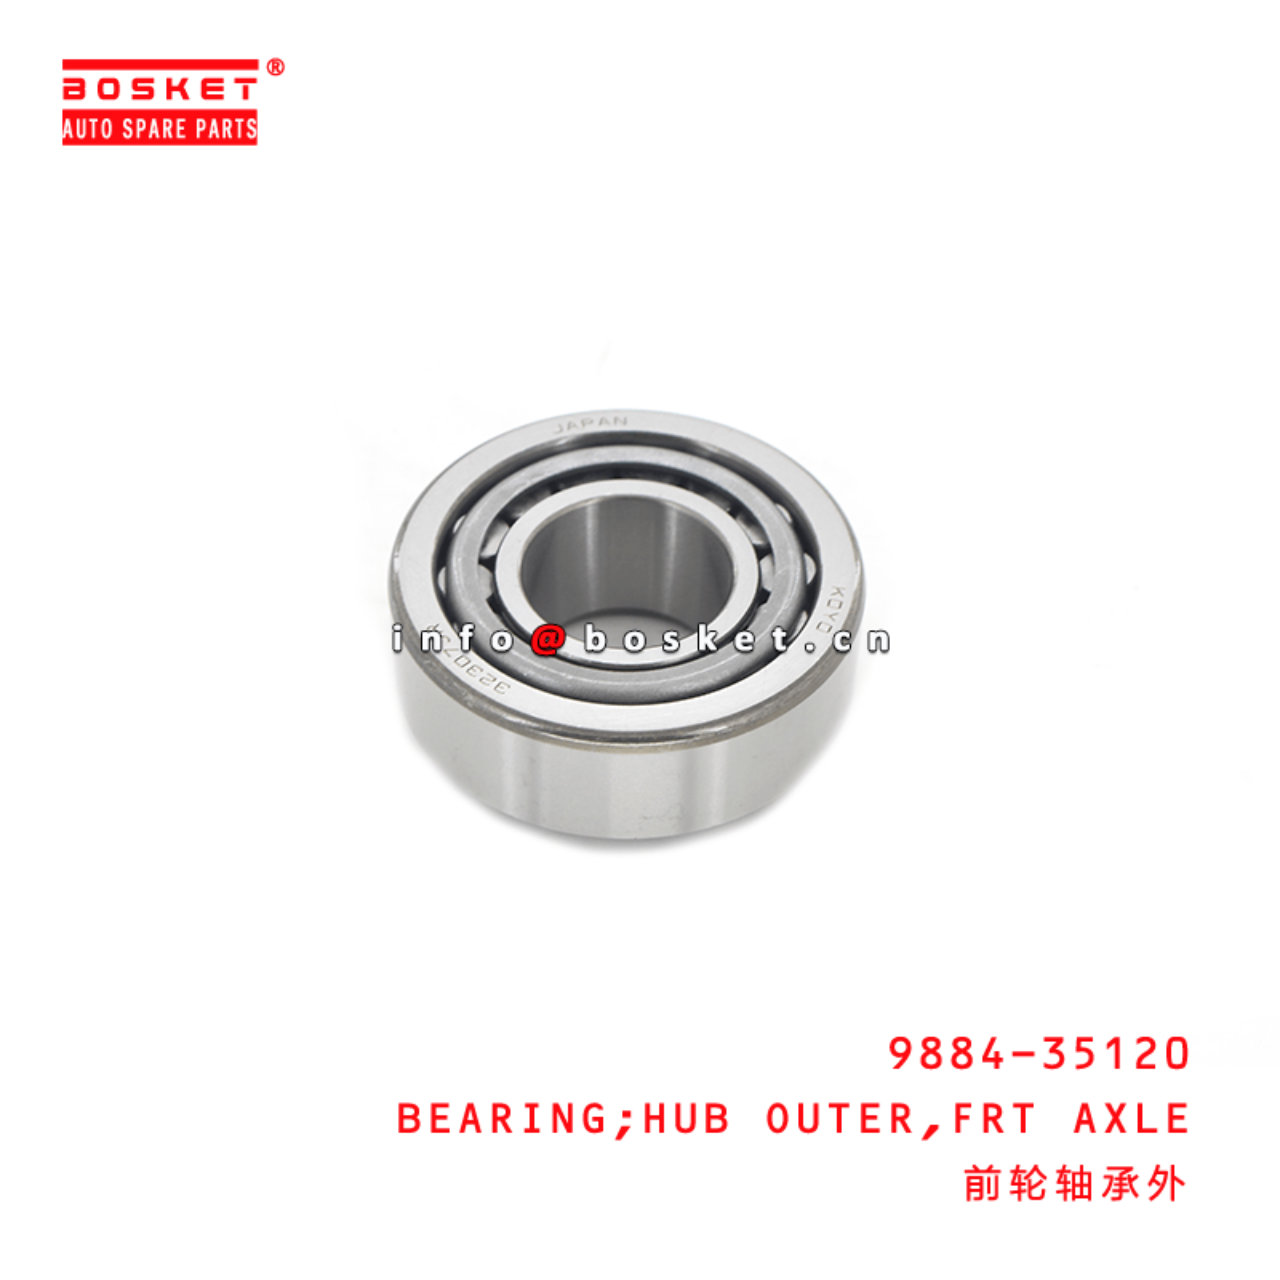  9884-35120 Front Axle Hub Outer Bearing Suitable For HINO300